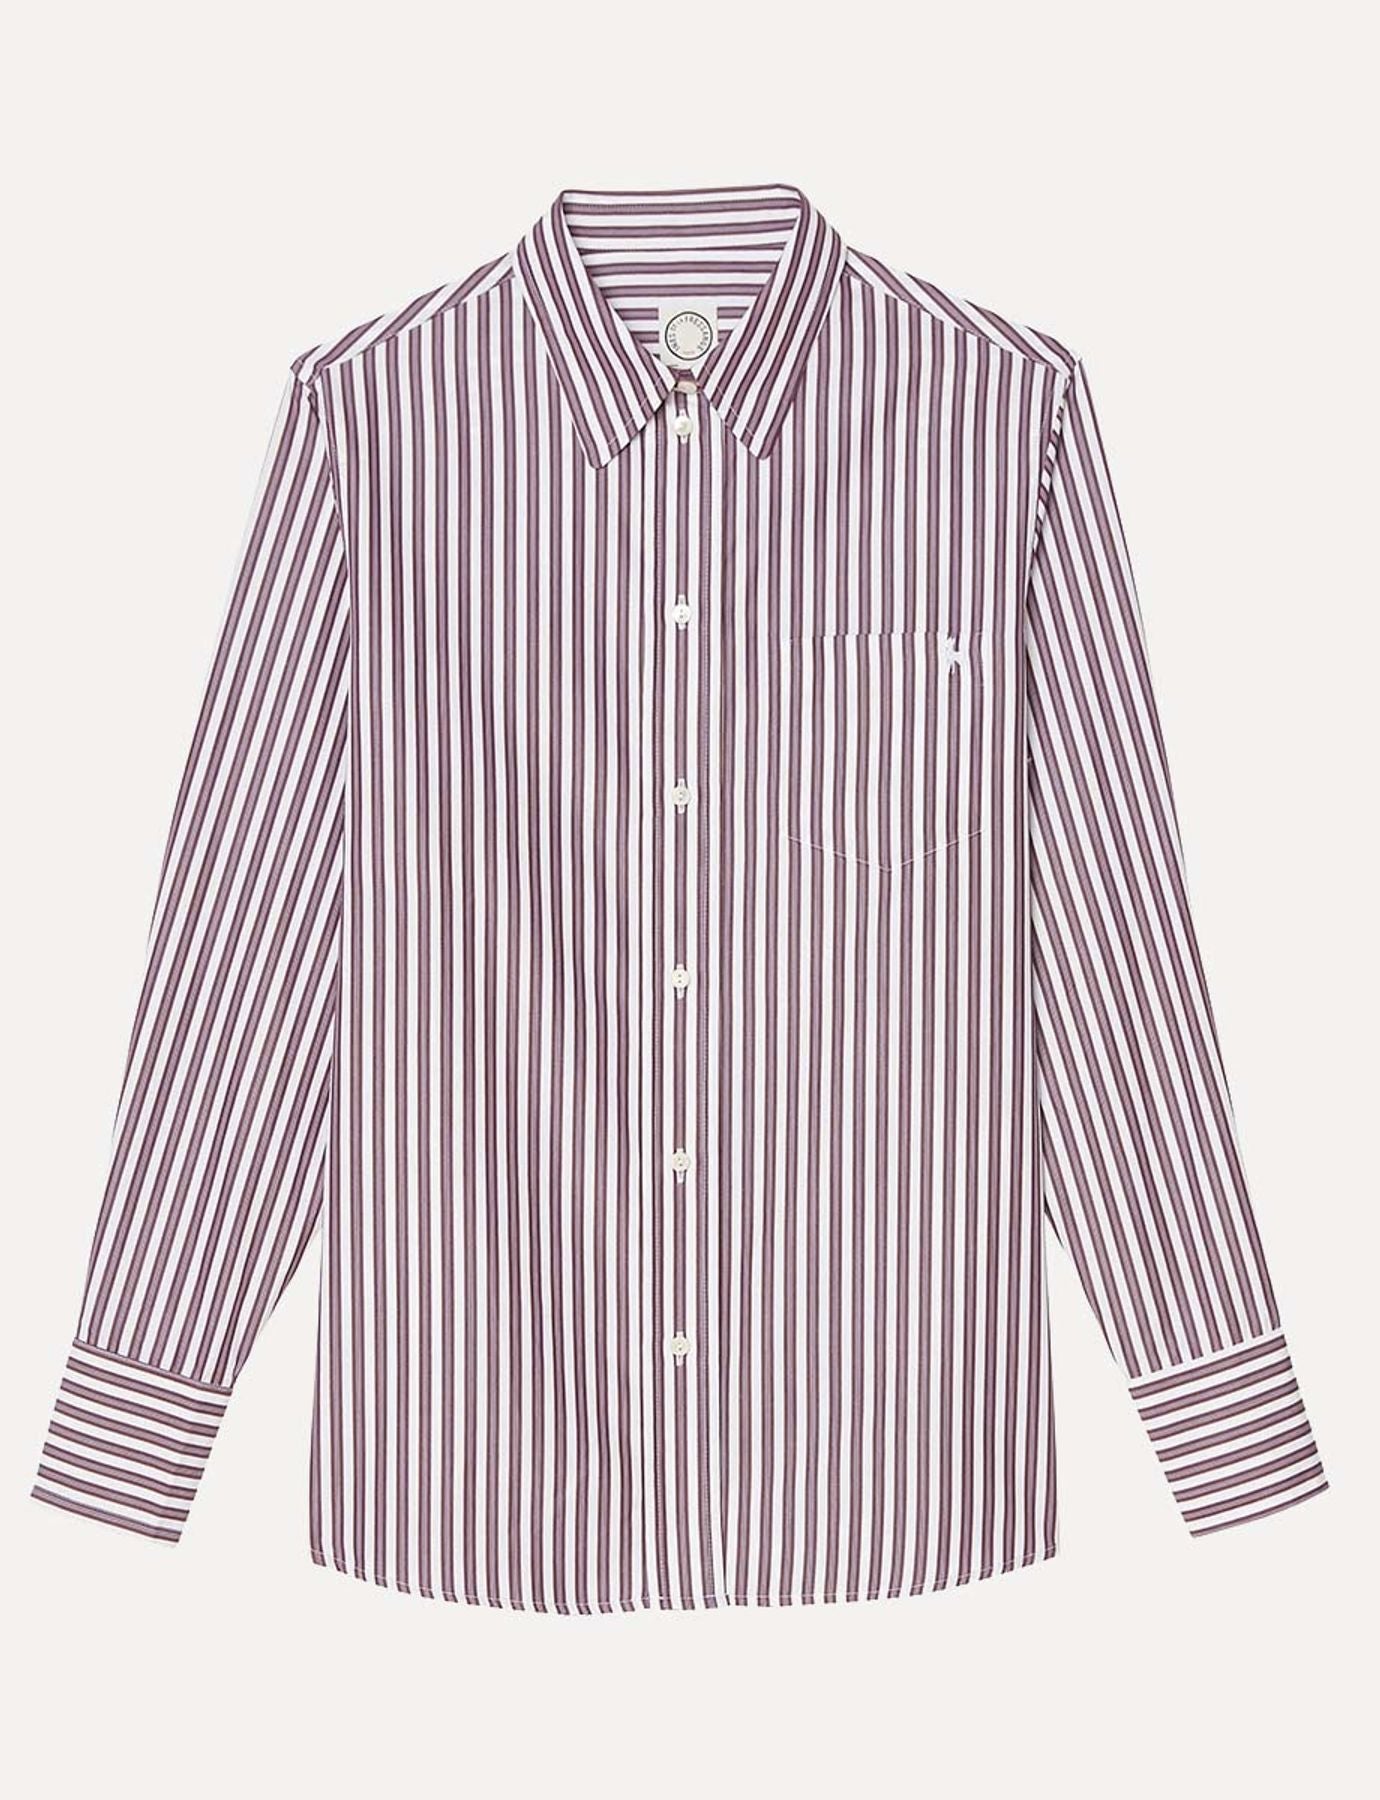 red-and-white striped shirt